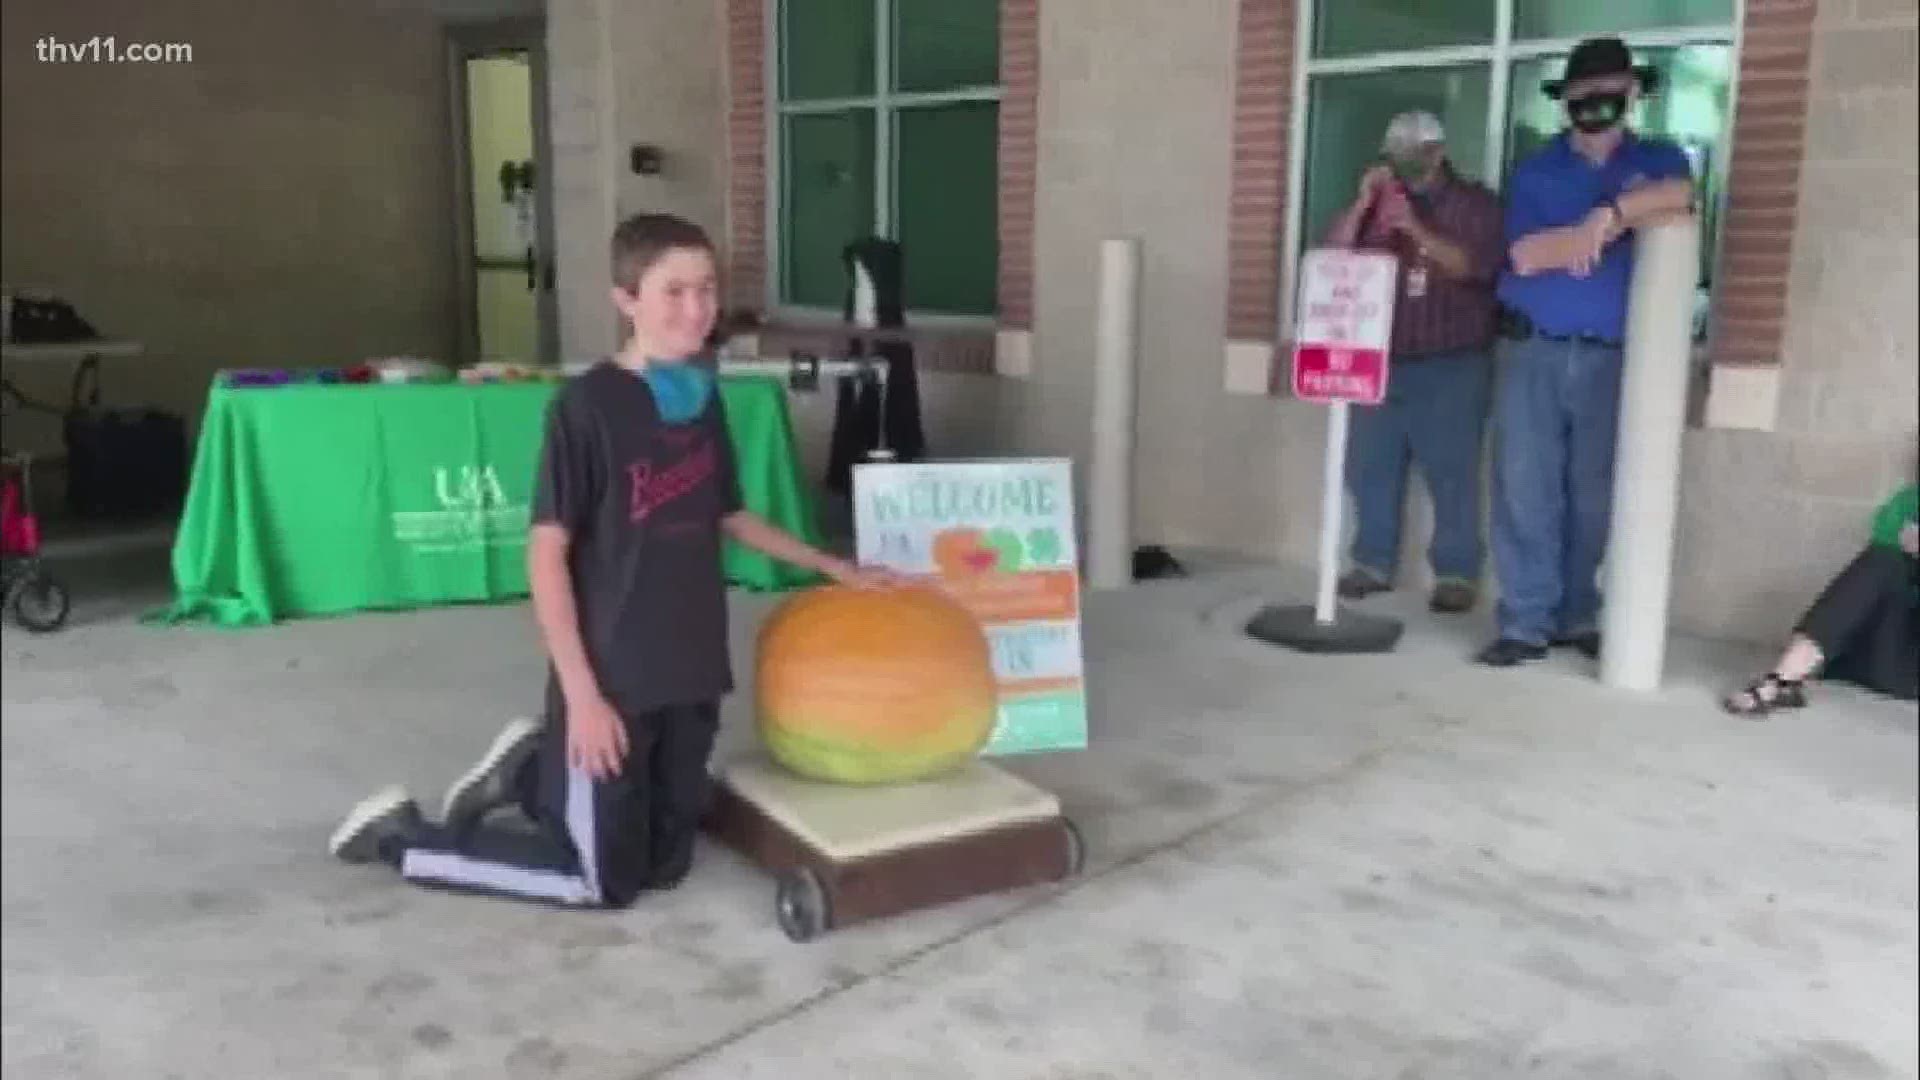 11-year-old Mark "Buster" Passmore won the Arkansas pumpkin and watermelon contest with a 334-lb pumpkin and a 111.5-pound watermelon!